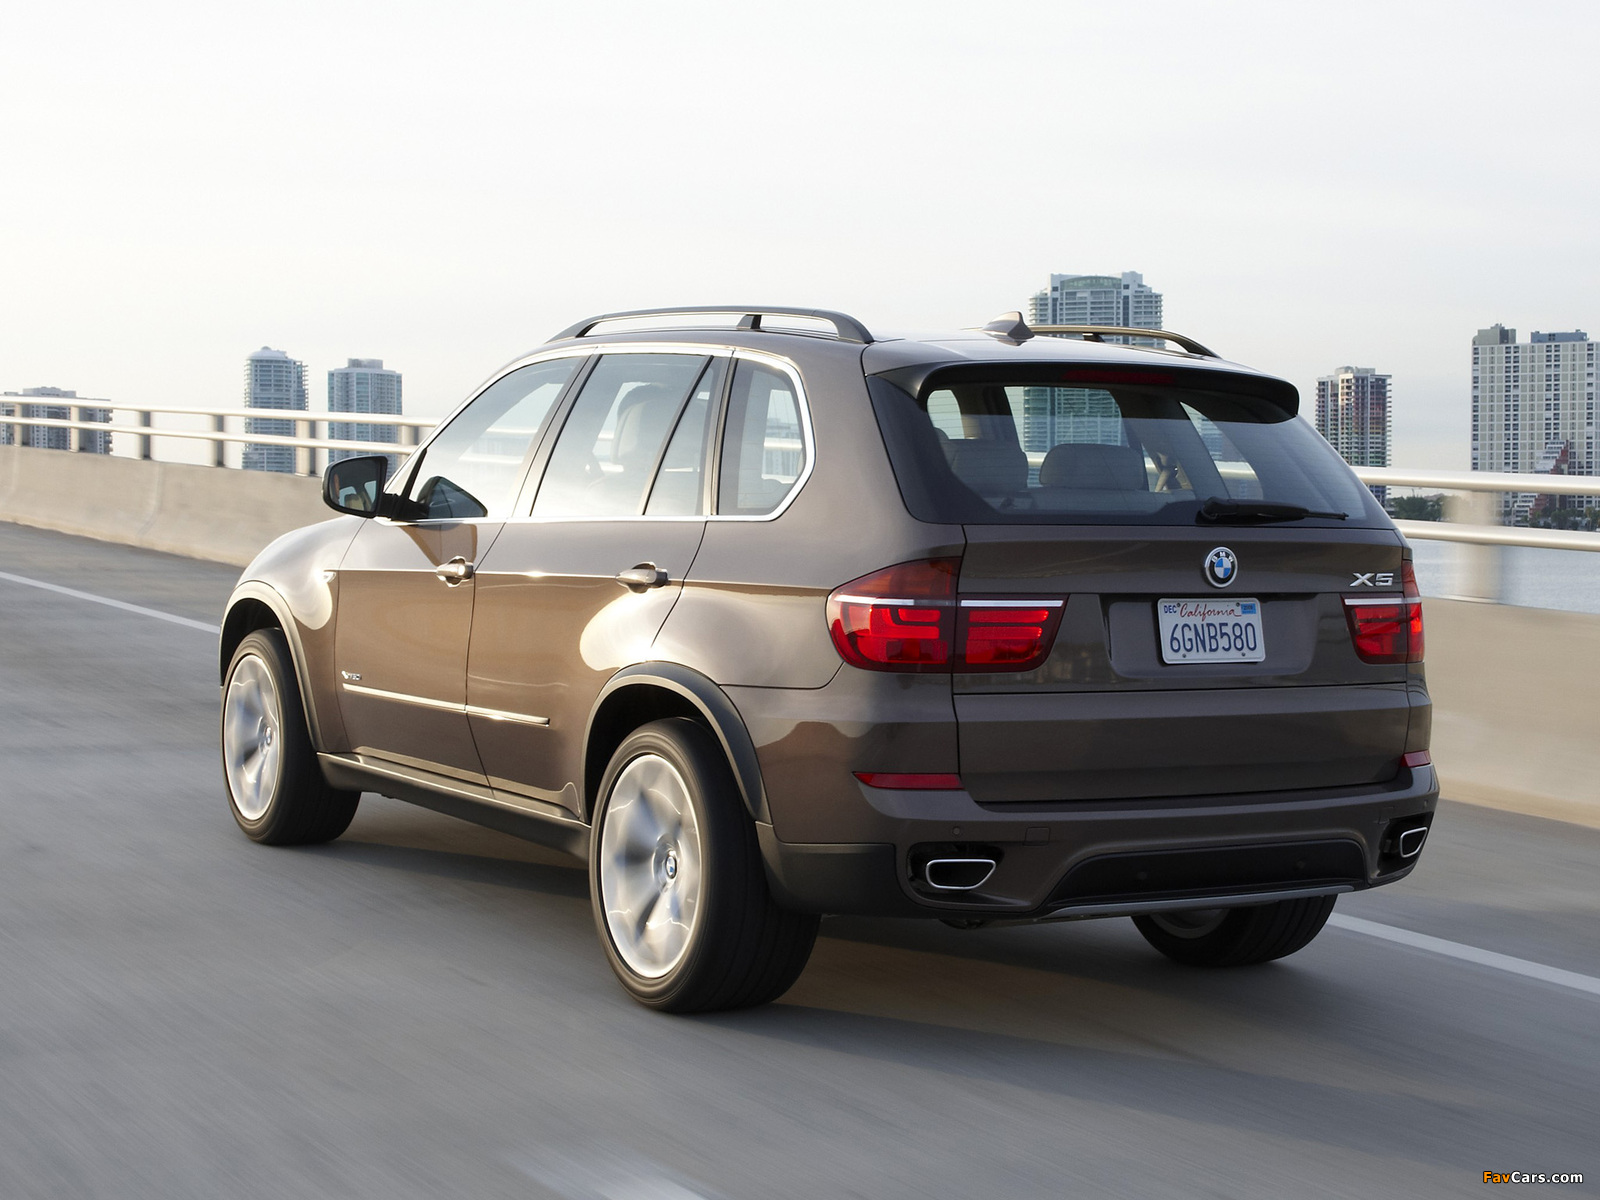 BMW X5 xDrive50i (E70) 2010 pictures (1600 x 1200)